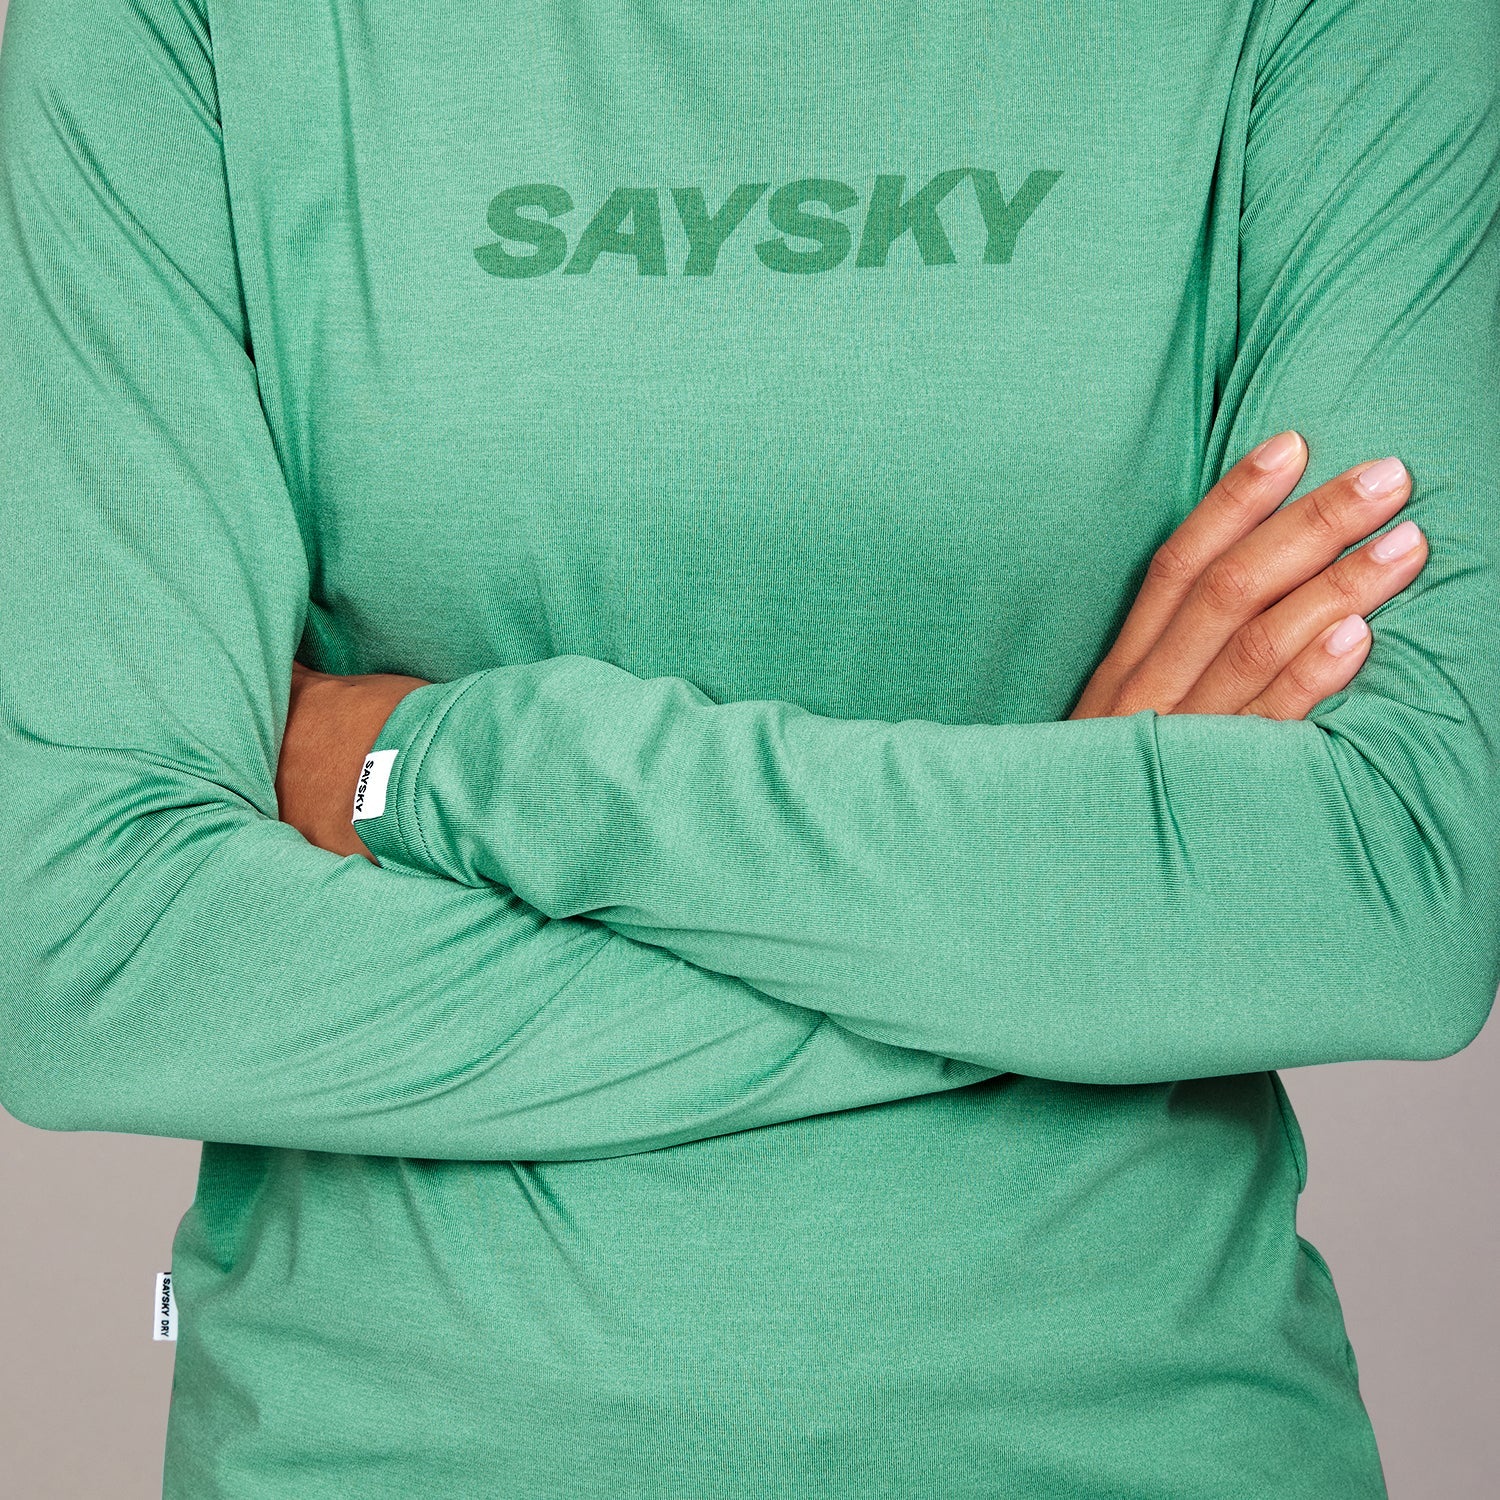 Saysky Logo Pace Women's Long Sleeve Top - Sole Mate